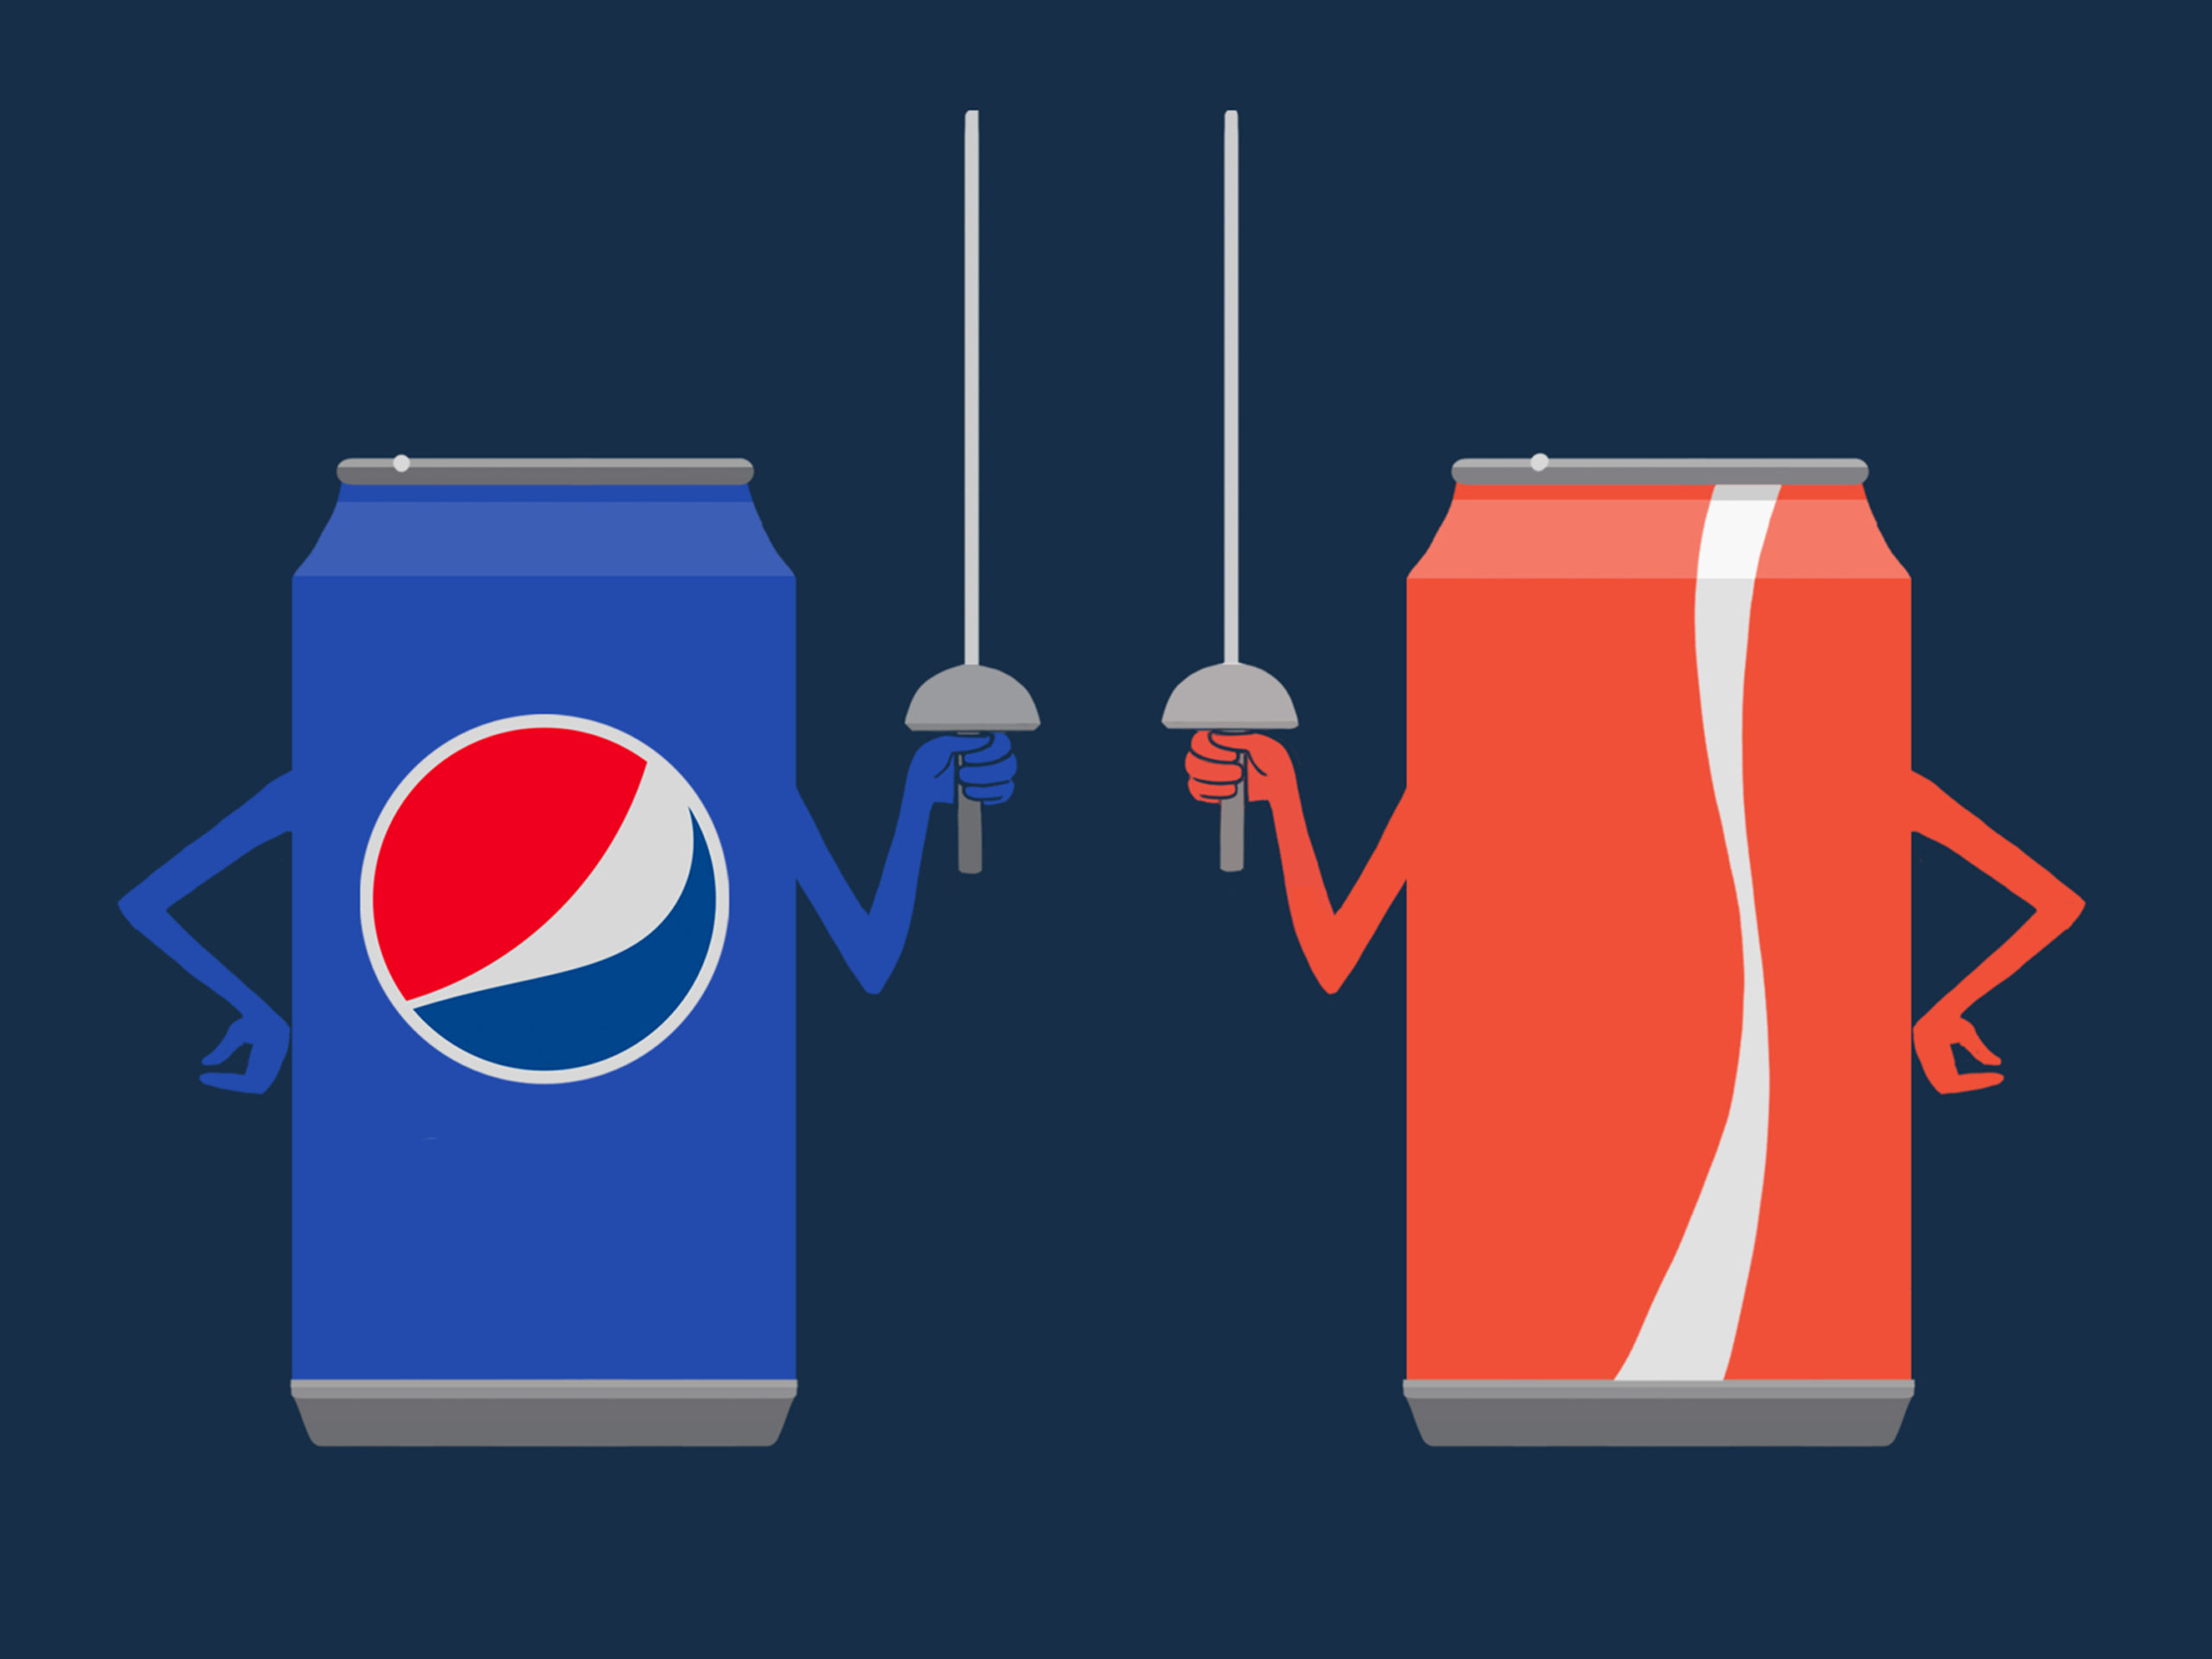 Pepsi and Coke cans with fencing swords